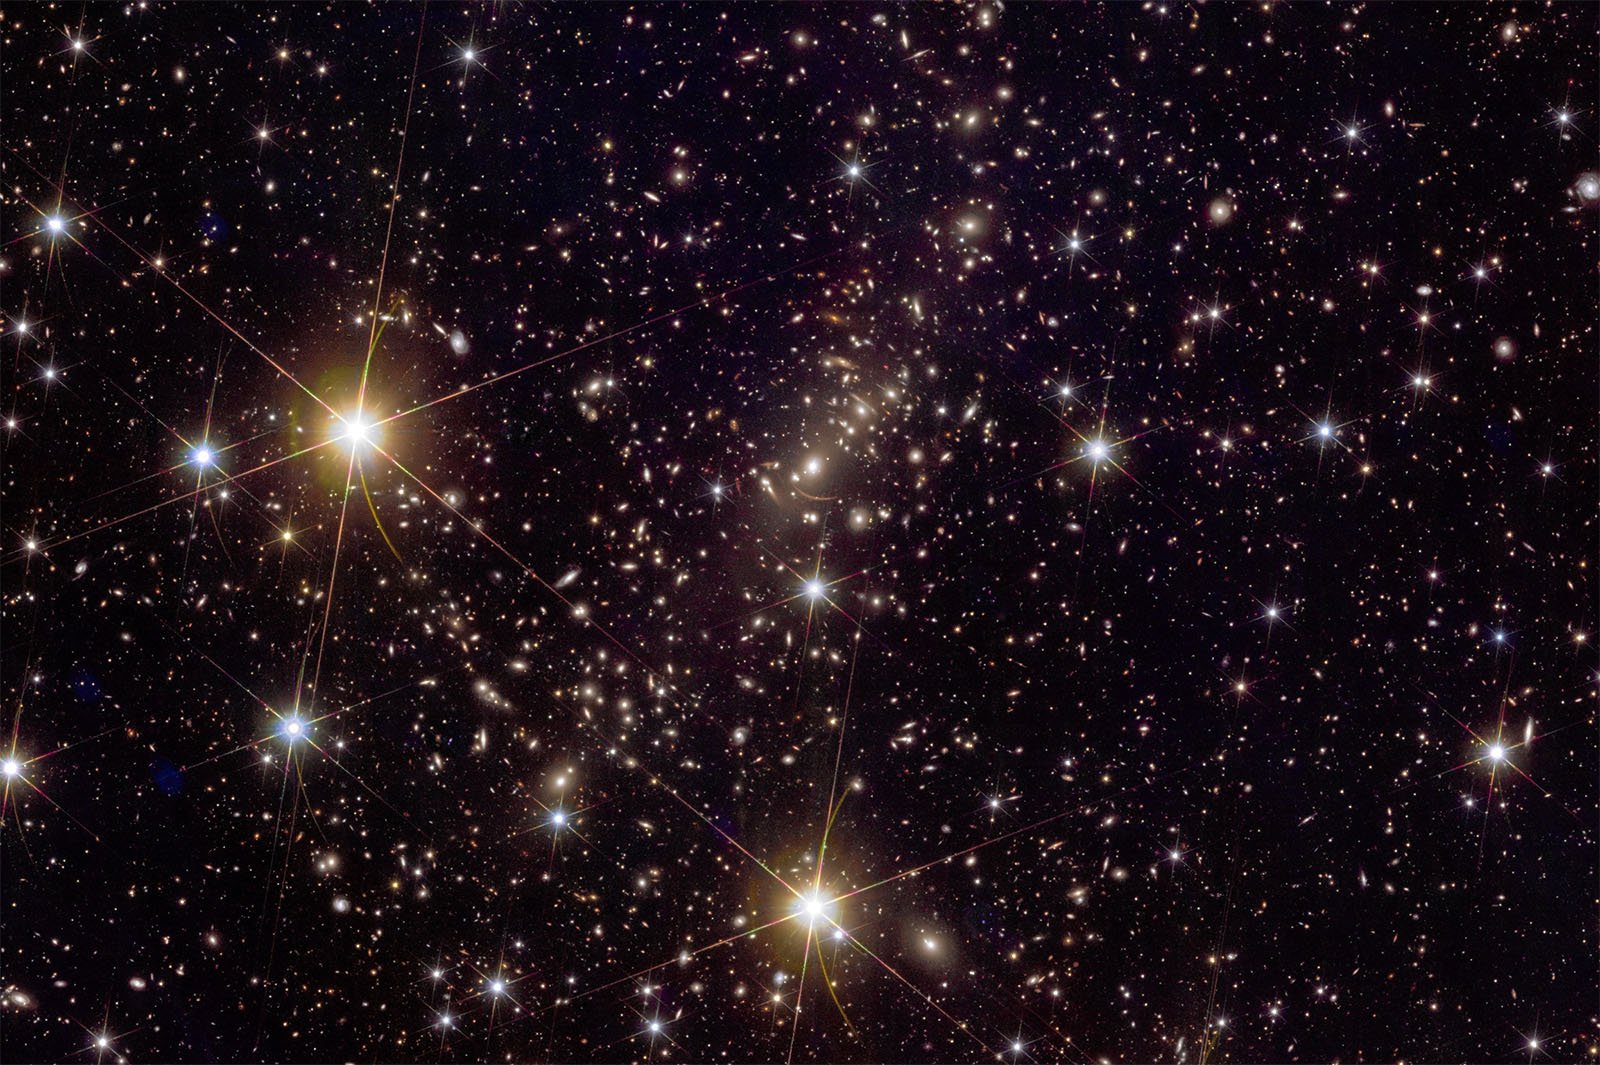 Image of a star-filled sky with countless bright stars and distant galaxies. Three large, bright stars in the foreground are prominently visible, creating a striking contrast with the myriad of smaller stars scattered throughout the dark expanse of space.